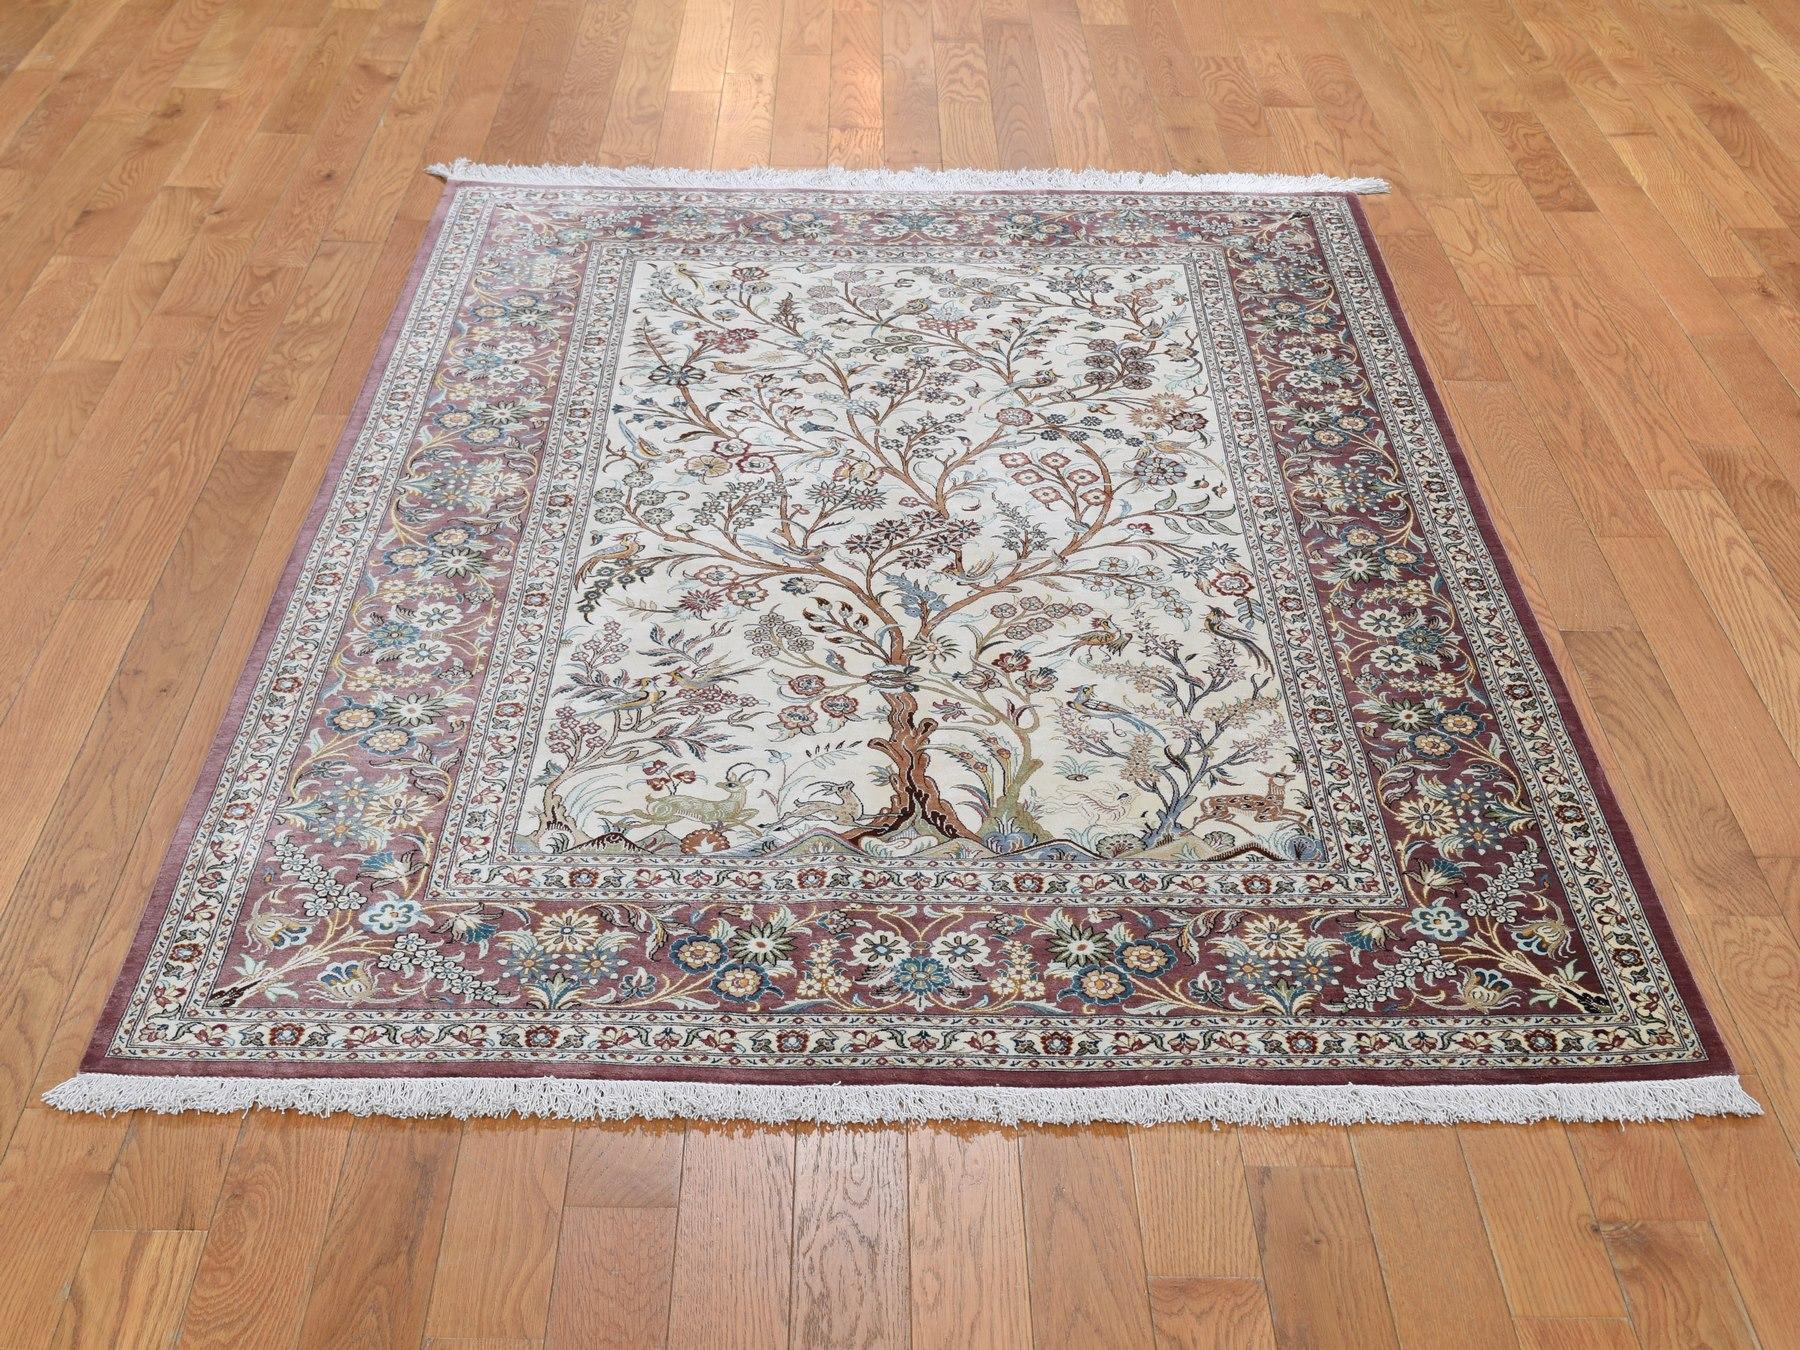 This is a truly genuine one-of-a-kind ivory pure silk Persian Qum signed 600 KPSI tree of life hand knotted rug. It has been knotted for months and months in the centuries-old Persian weaving craftsmanship techniques by expert artisans.

Primary